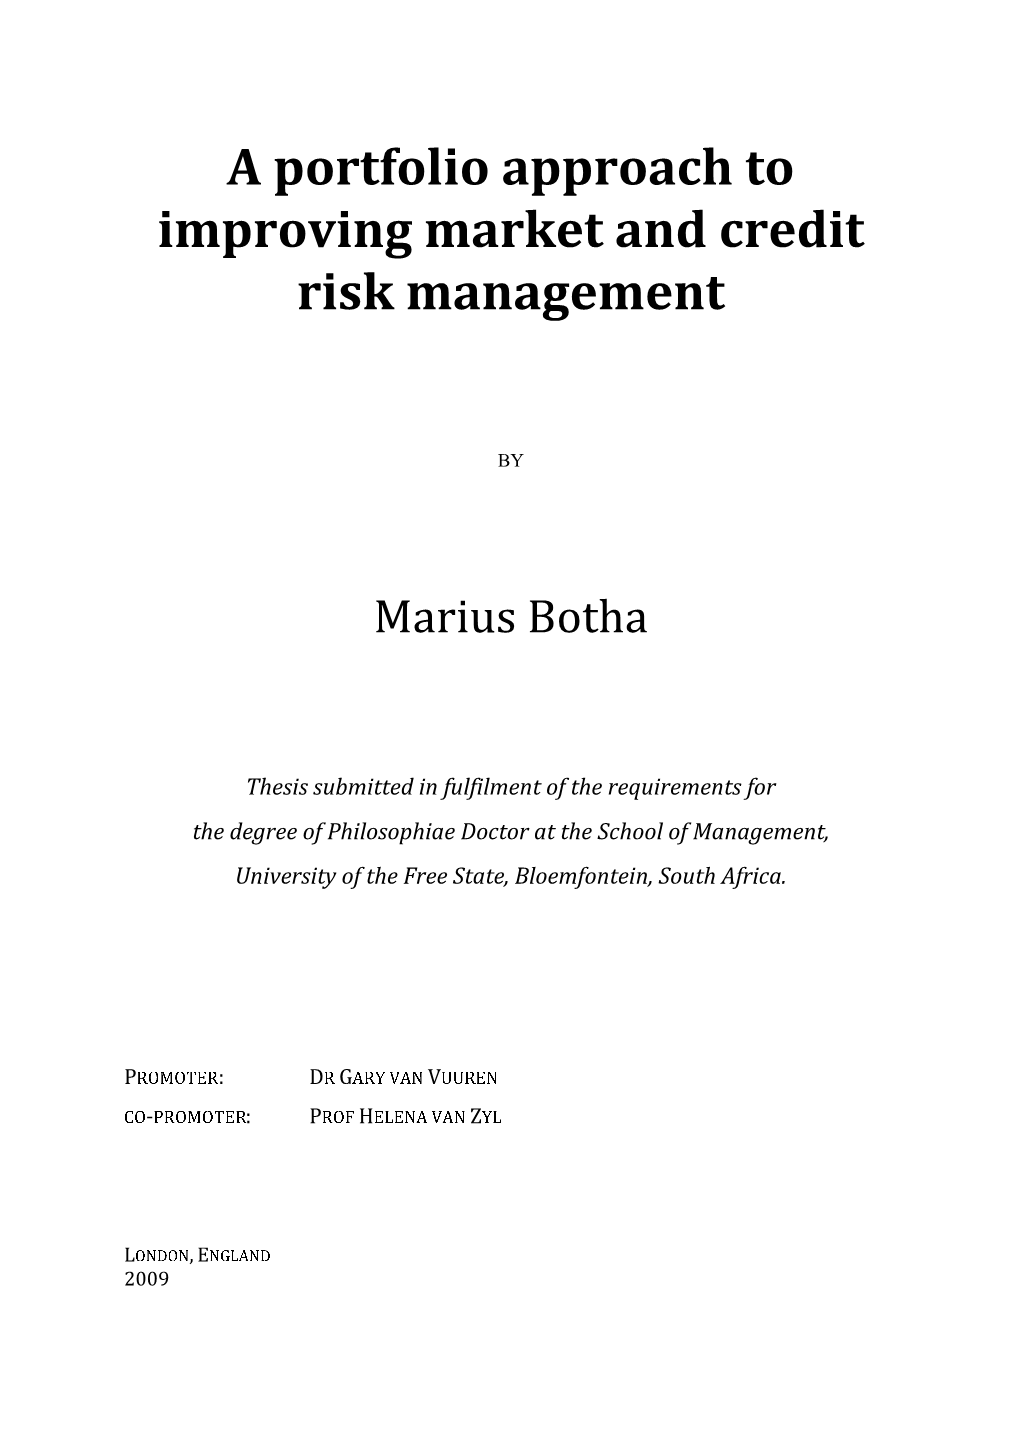 A Portfolio Approach to Improving Market and Credit Risk Management